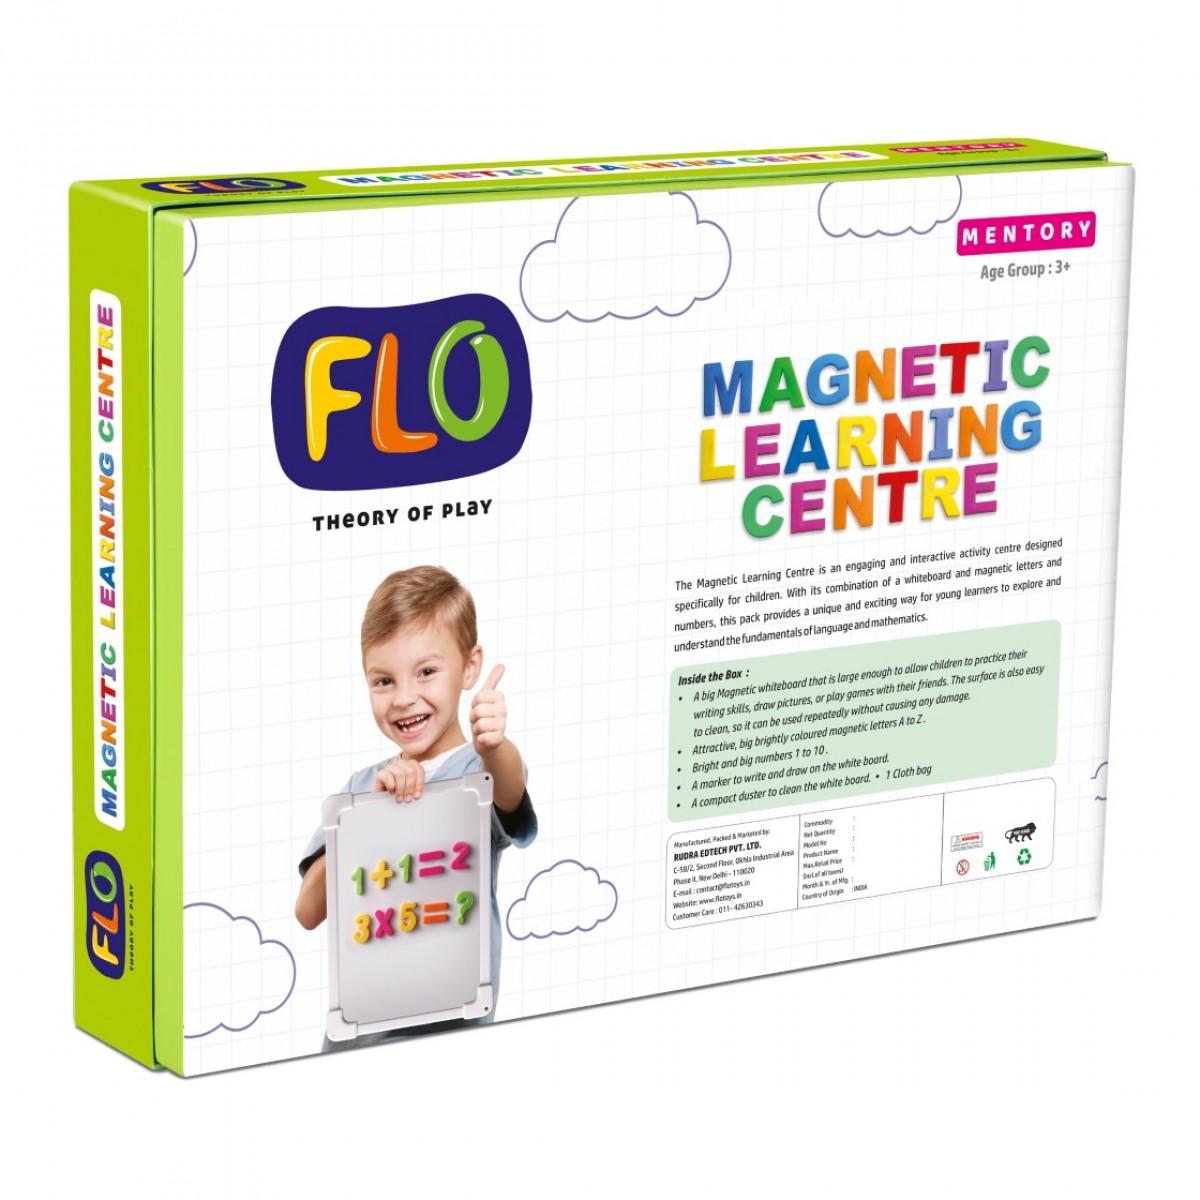 Flo Magnetic Learning Centre learning kit for kids Multicolour 3Y+